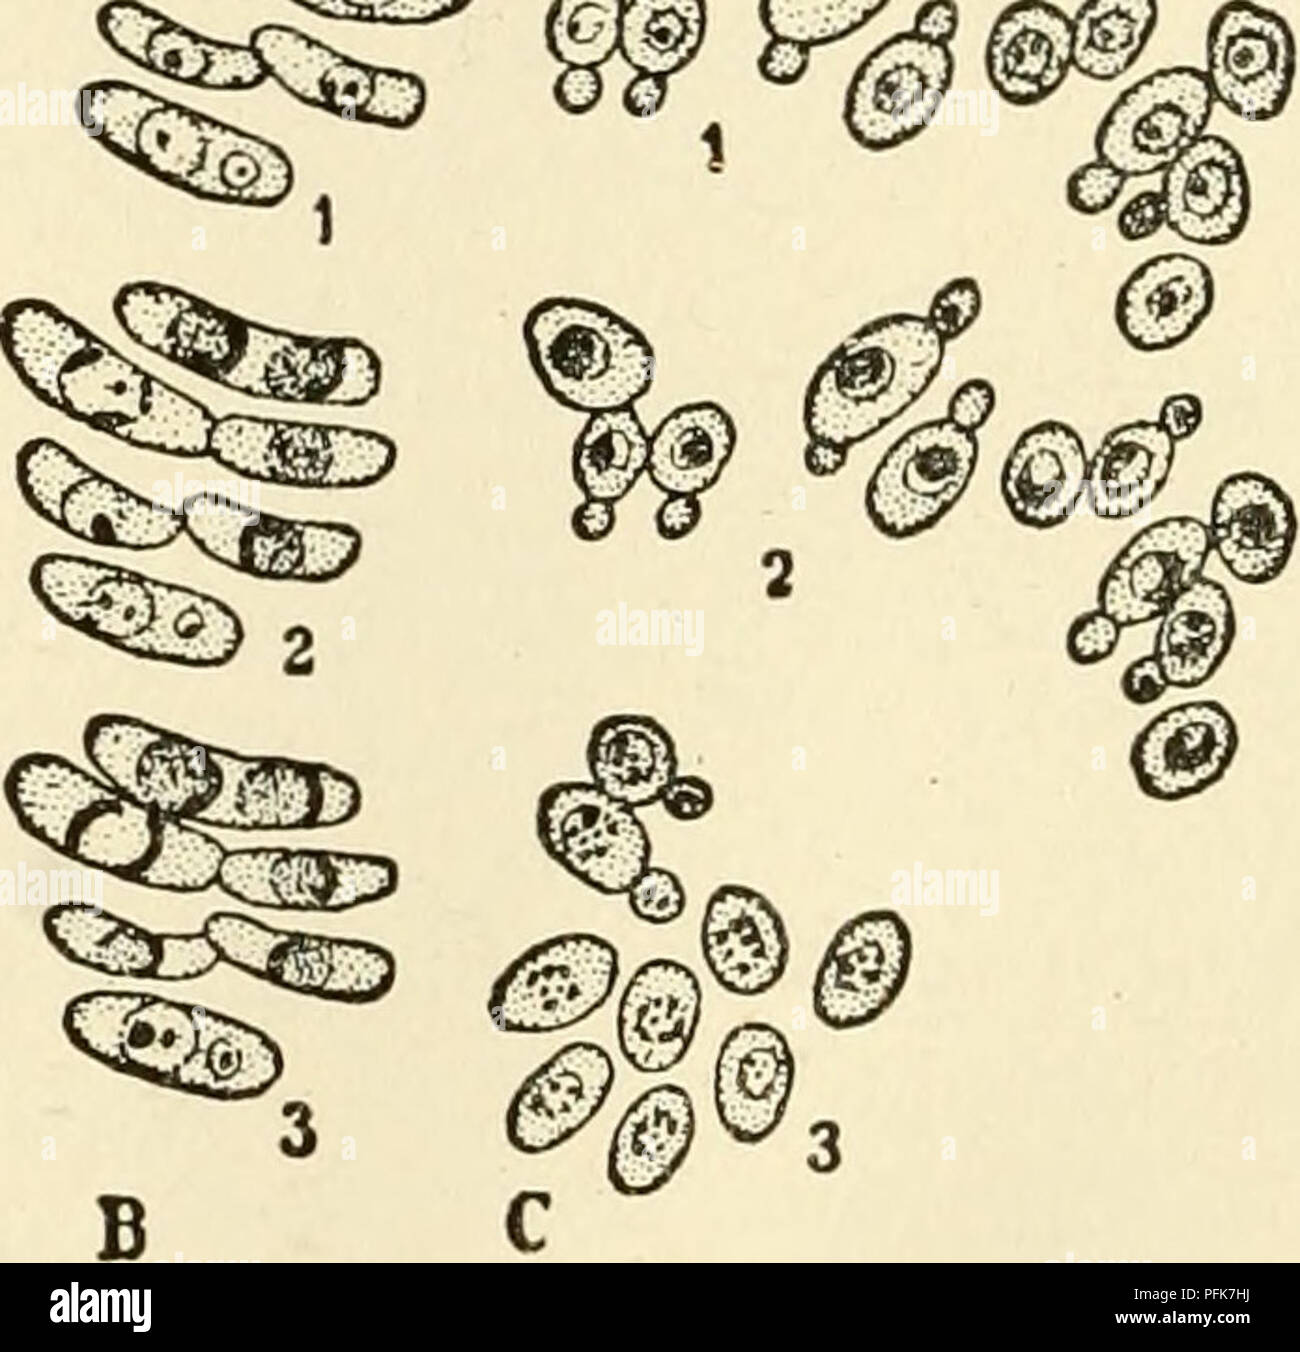 . The cytoplasm of the plant cell. Plant cells and tissues; Protoplasm. Fig. 85. — Vital staining with neutral red, except 03, observed under the microscope. A, PeniciUium glaucum. 1, before staining; 2, small deeply stained precipitates in the vacuole showing Brownian movement; 3, fusion of small precipitates to larger bodies; 4, precipitates appressed to peripheral wall of vacuole, diffuse staining of sap. B, Zygosaccharomyces Chevalieri. 1, small precipitates in vacuole; 2, 3, fusion, bodies now appressed to wall of the vacuole, sap diffusely stained. C, Saccharomyces ellipsoideus; 1, 2, as Stock Photo